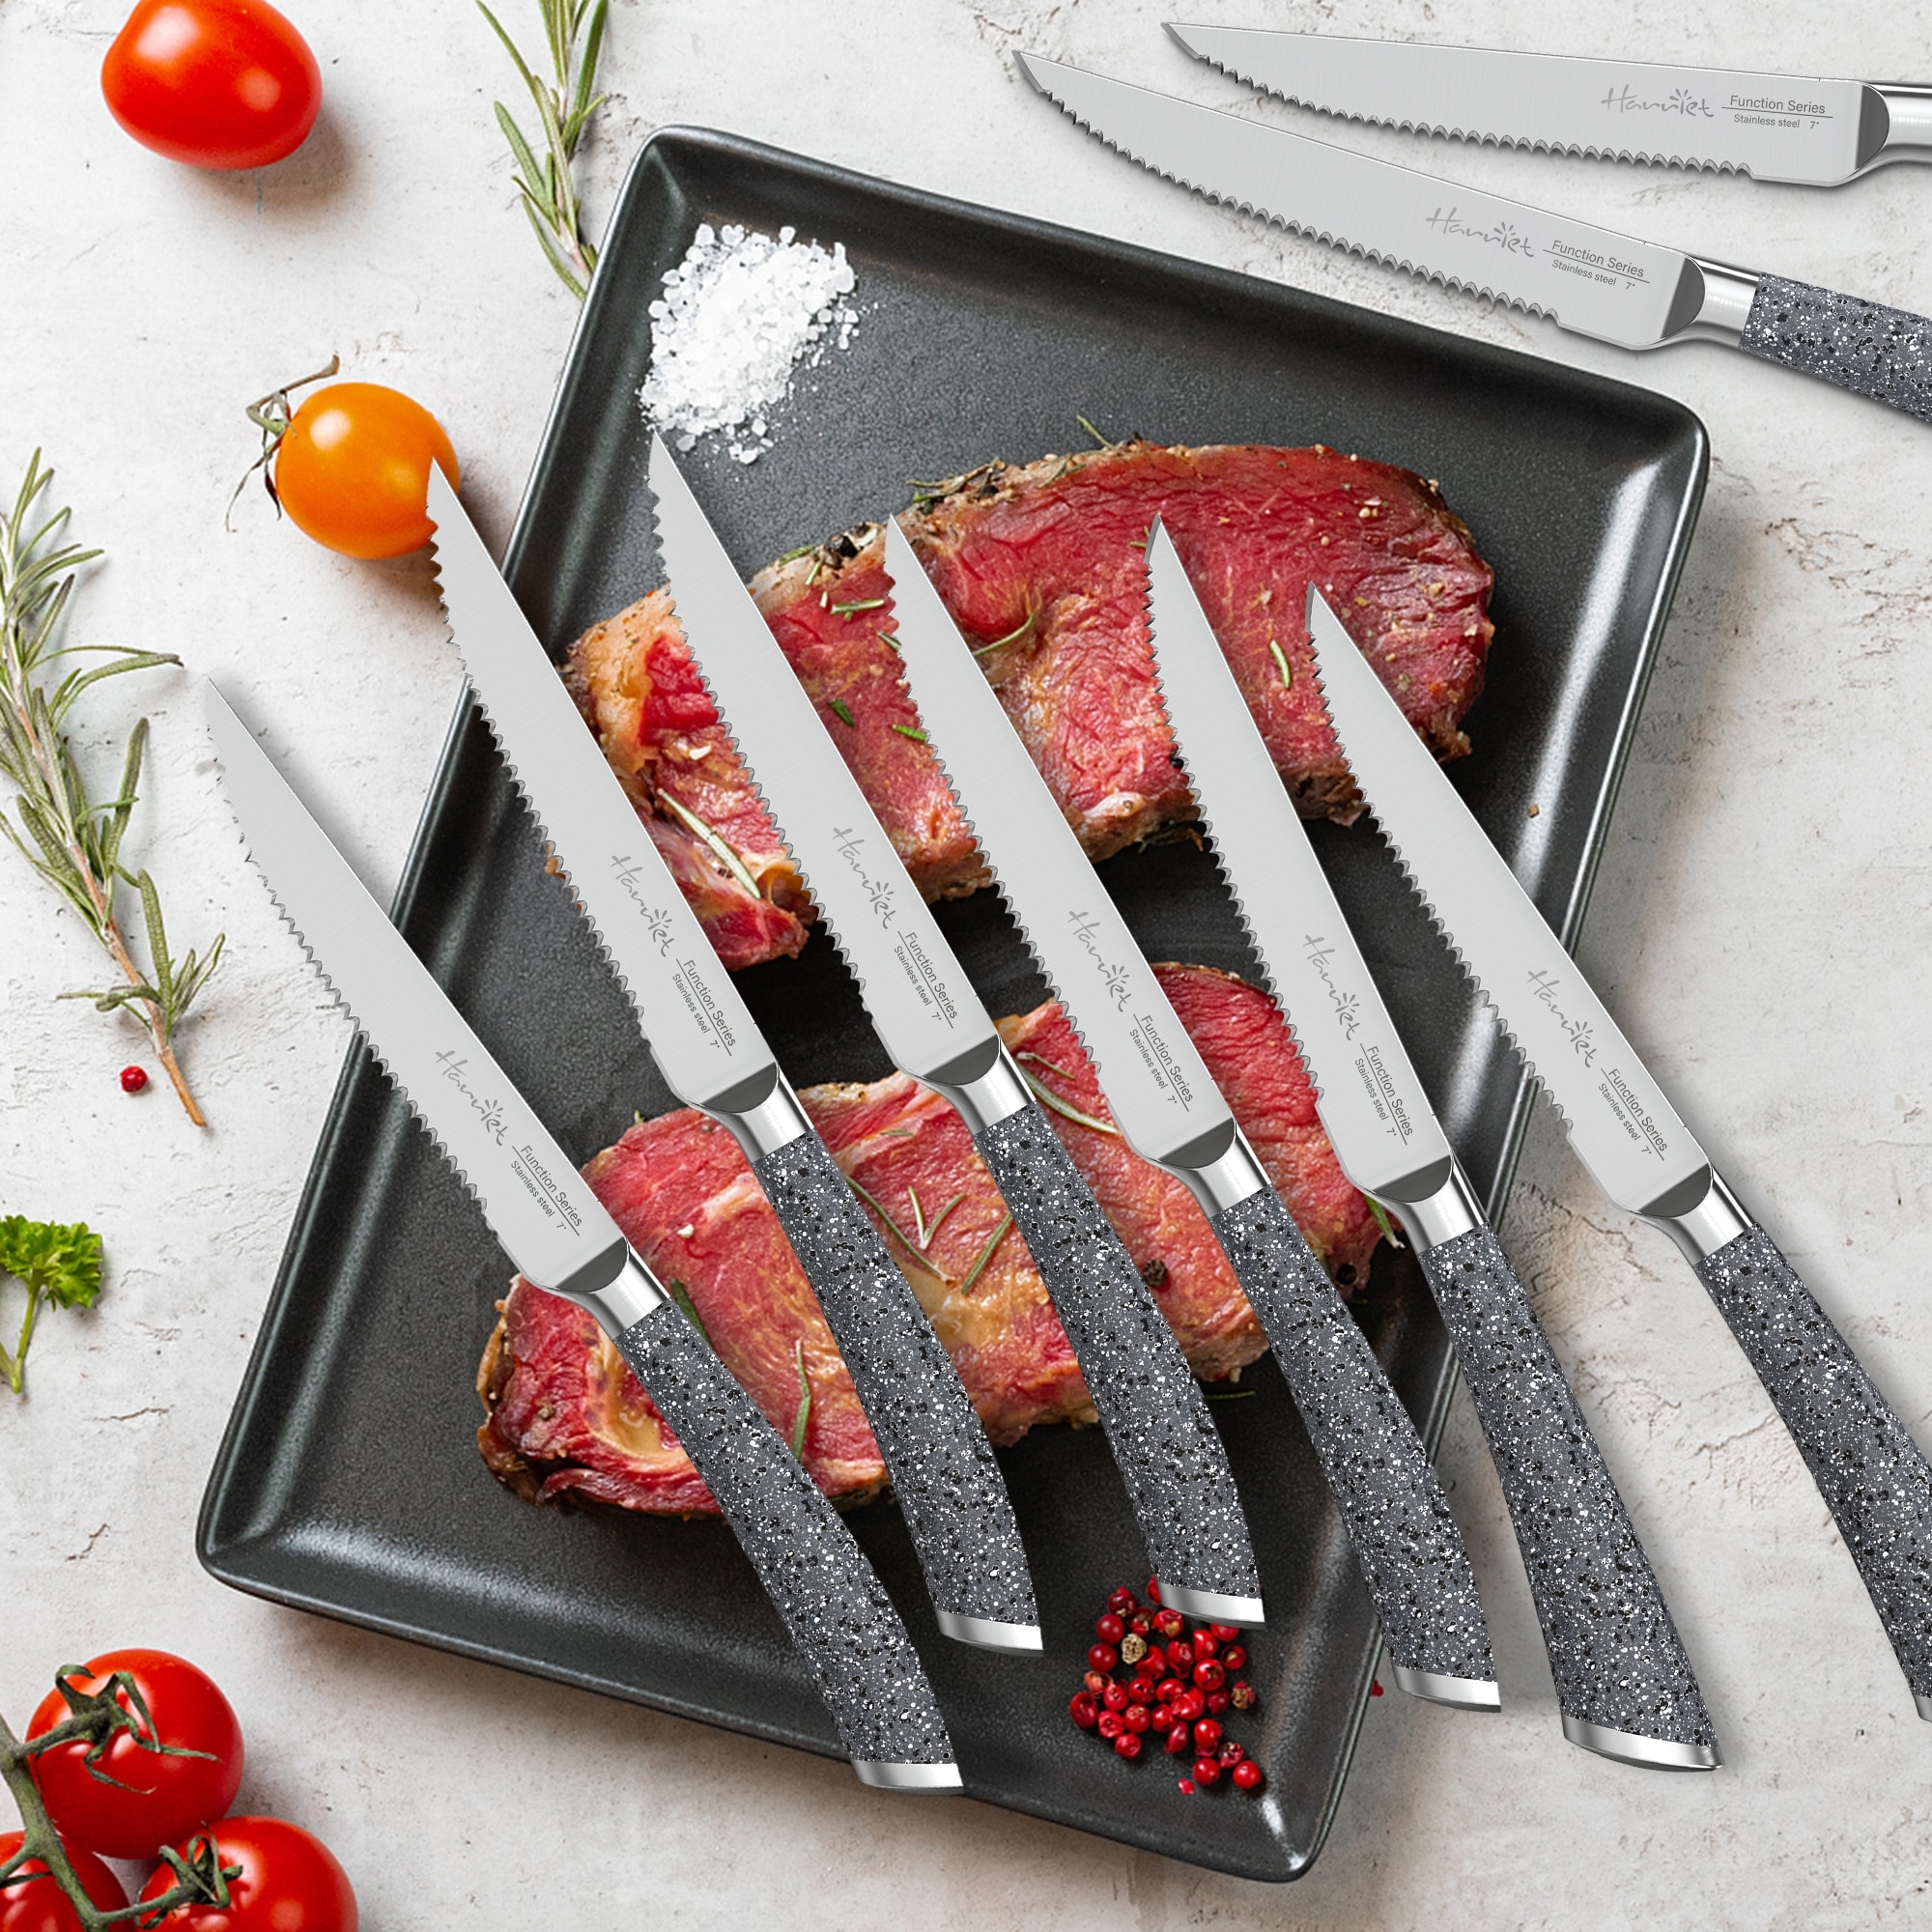 https://ak1.ostkcdn.com/images/products/is/images/direct/368323498c70c5a7cb55432b1c14f38ee2b580df/Serrated-Steak-Knives-Set-Of-8.jpg